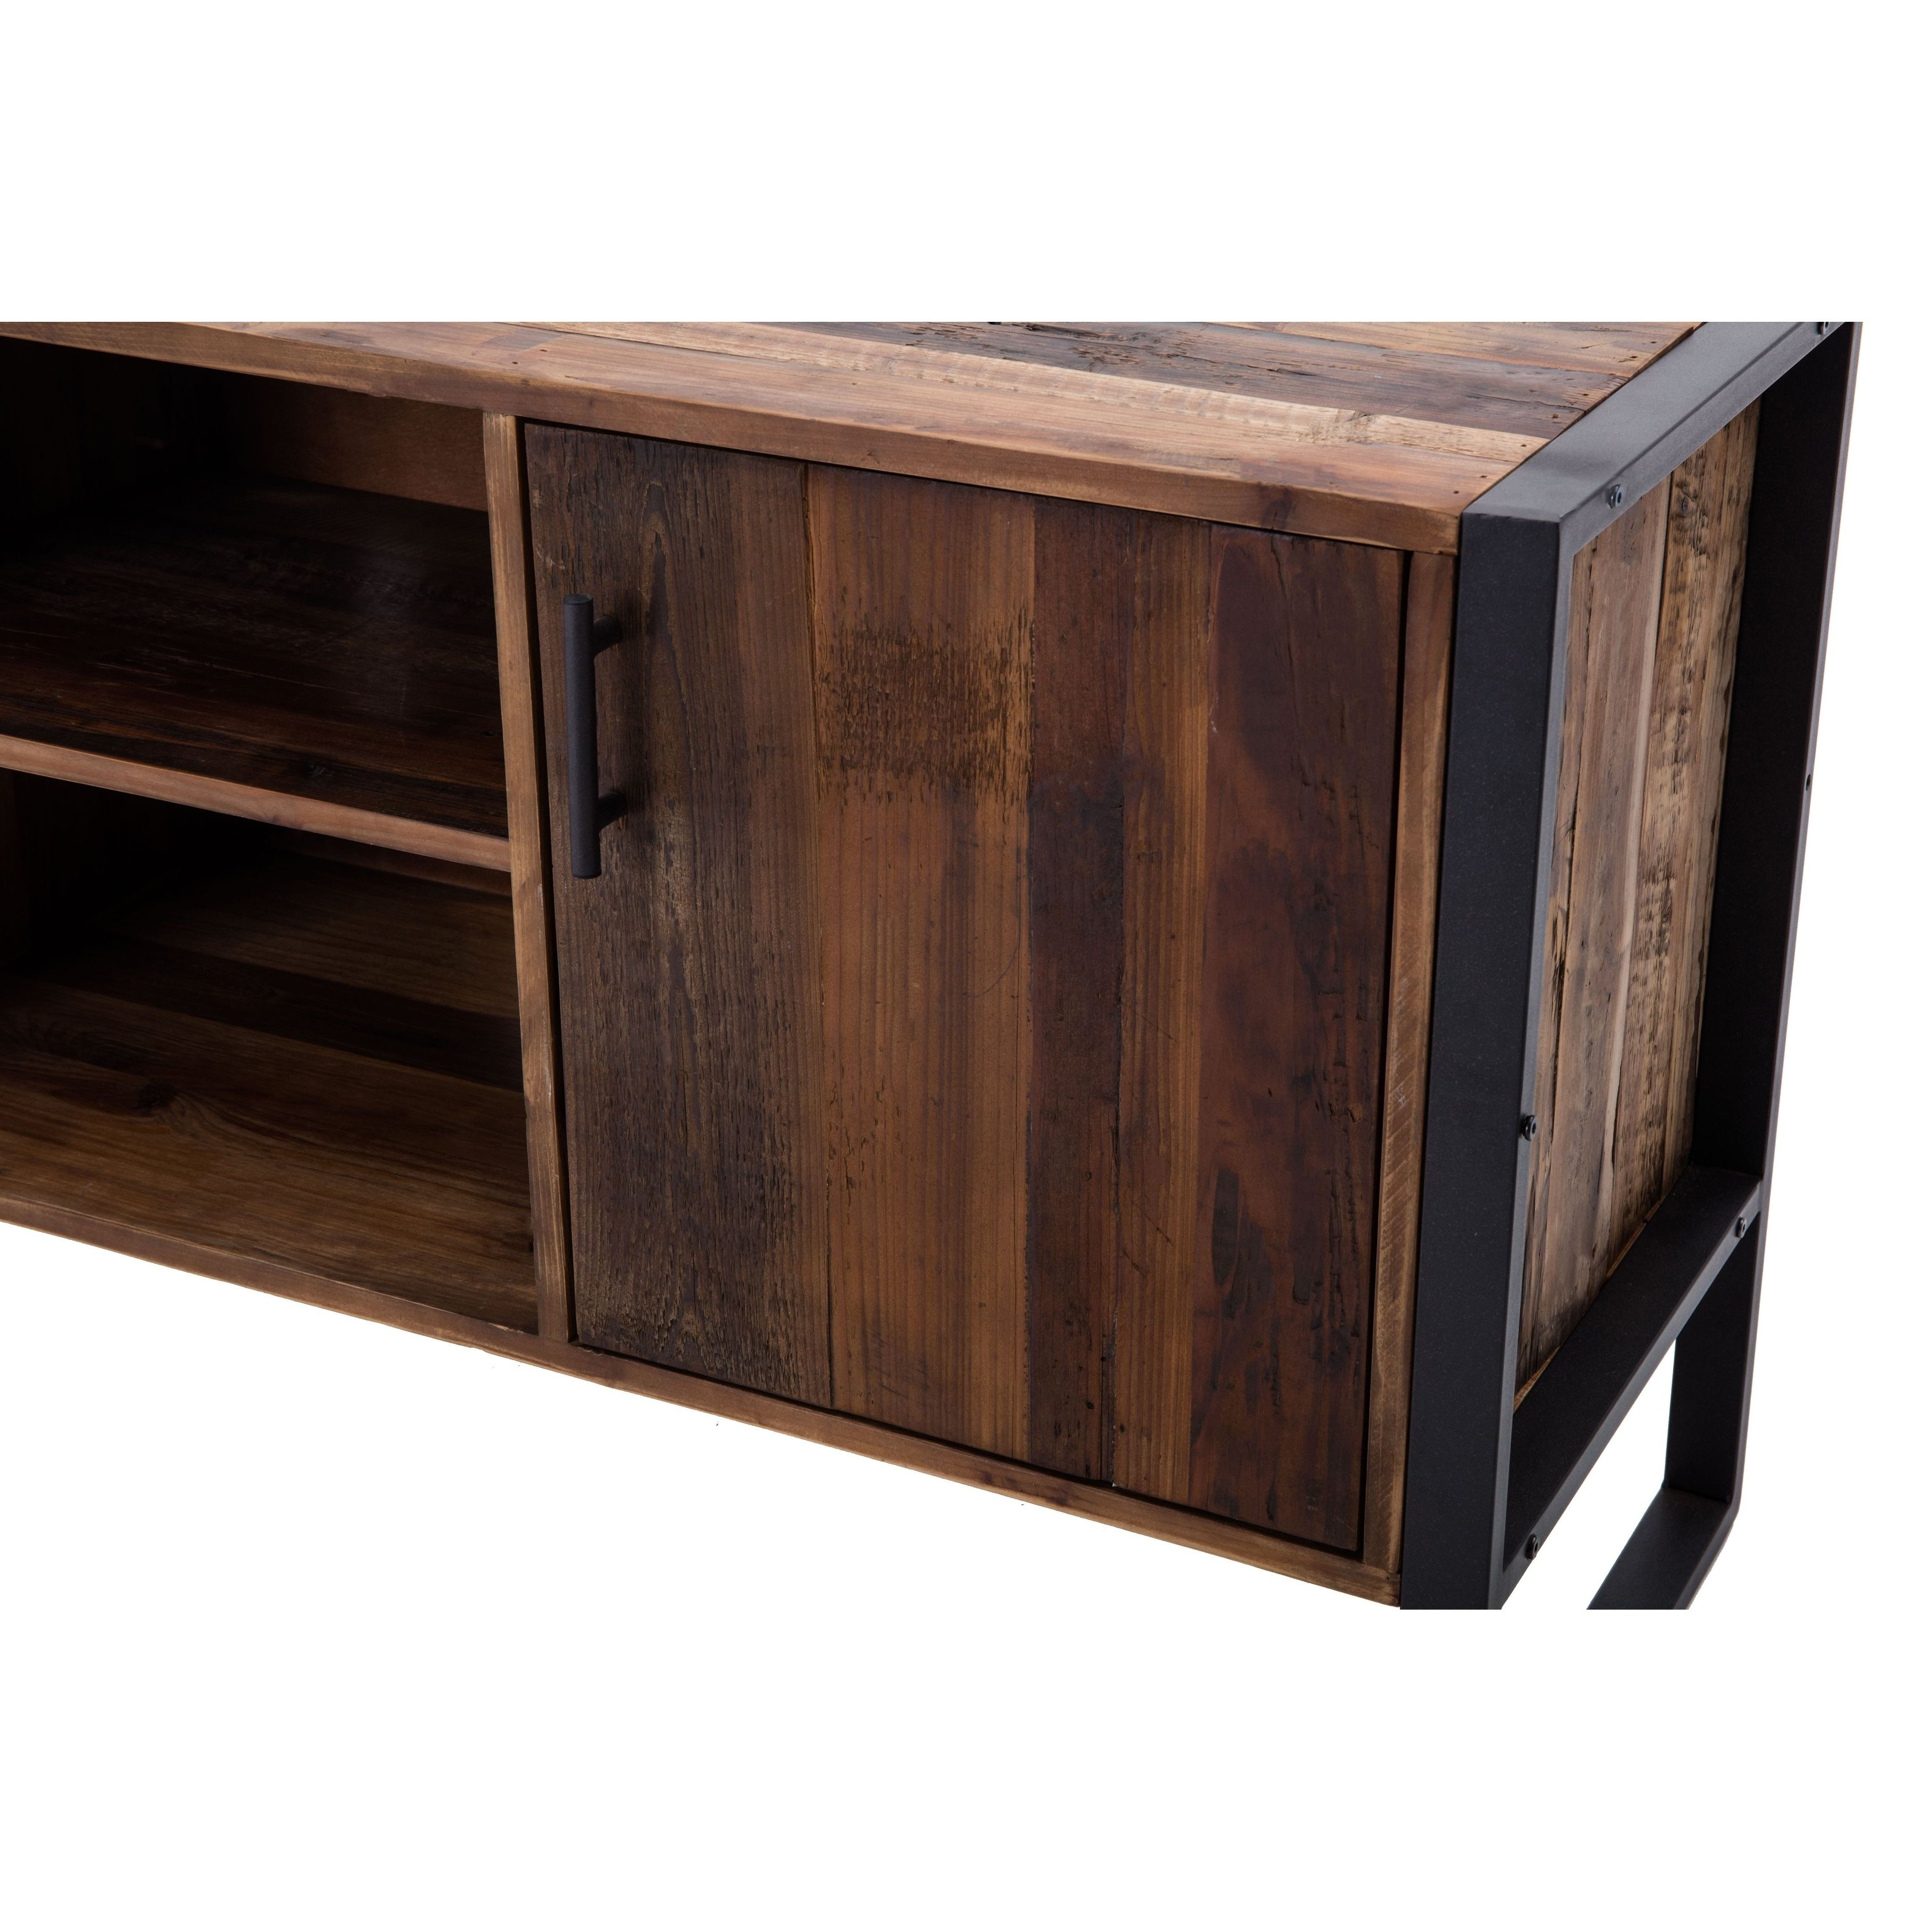 Most Recent Wood And Metal Tv Stands In Shop Crawford & Burke Ruffalo Wood/ Metal Tv Stand – Ships To Canada (View 5 of 20)